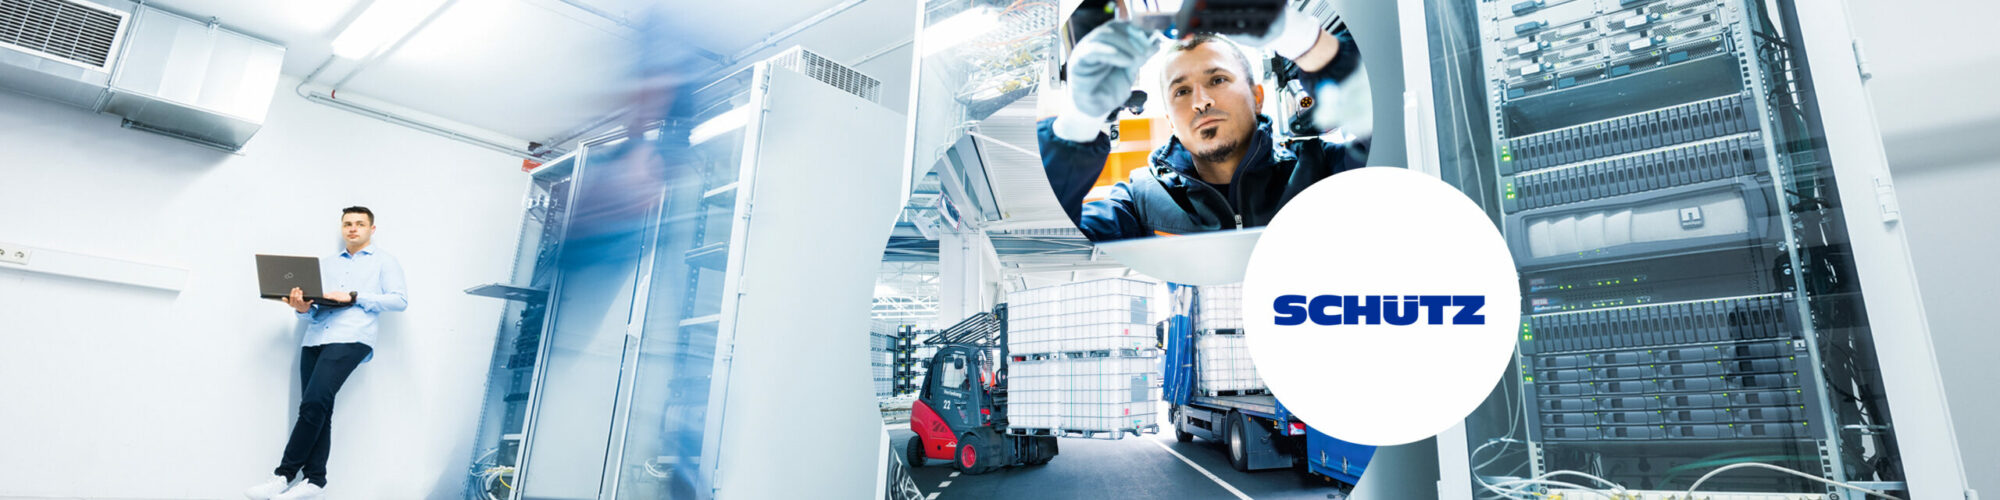 In the background is a man with a laptop in a data center, in the foreground are three circular images with the SCHÜTZ logo, an assembly worker and a forklift | Success Story | SCHÜTZ sets the course for its SAP S/4HANA migration